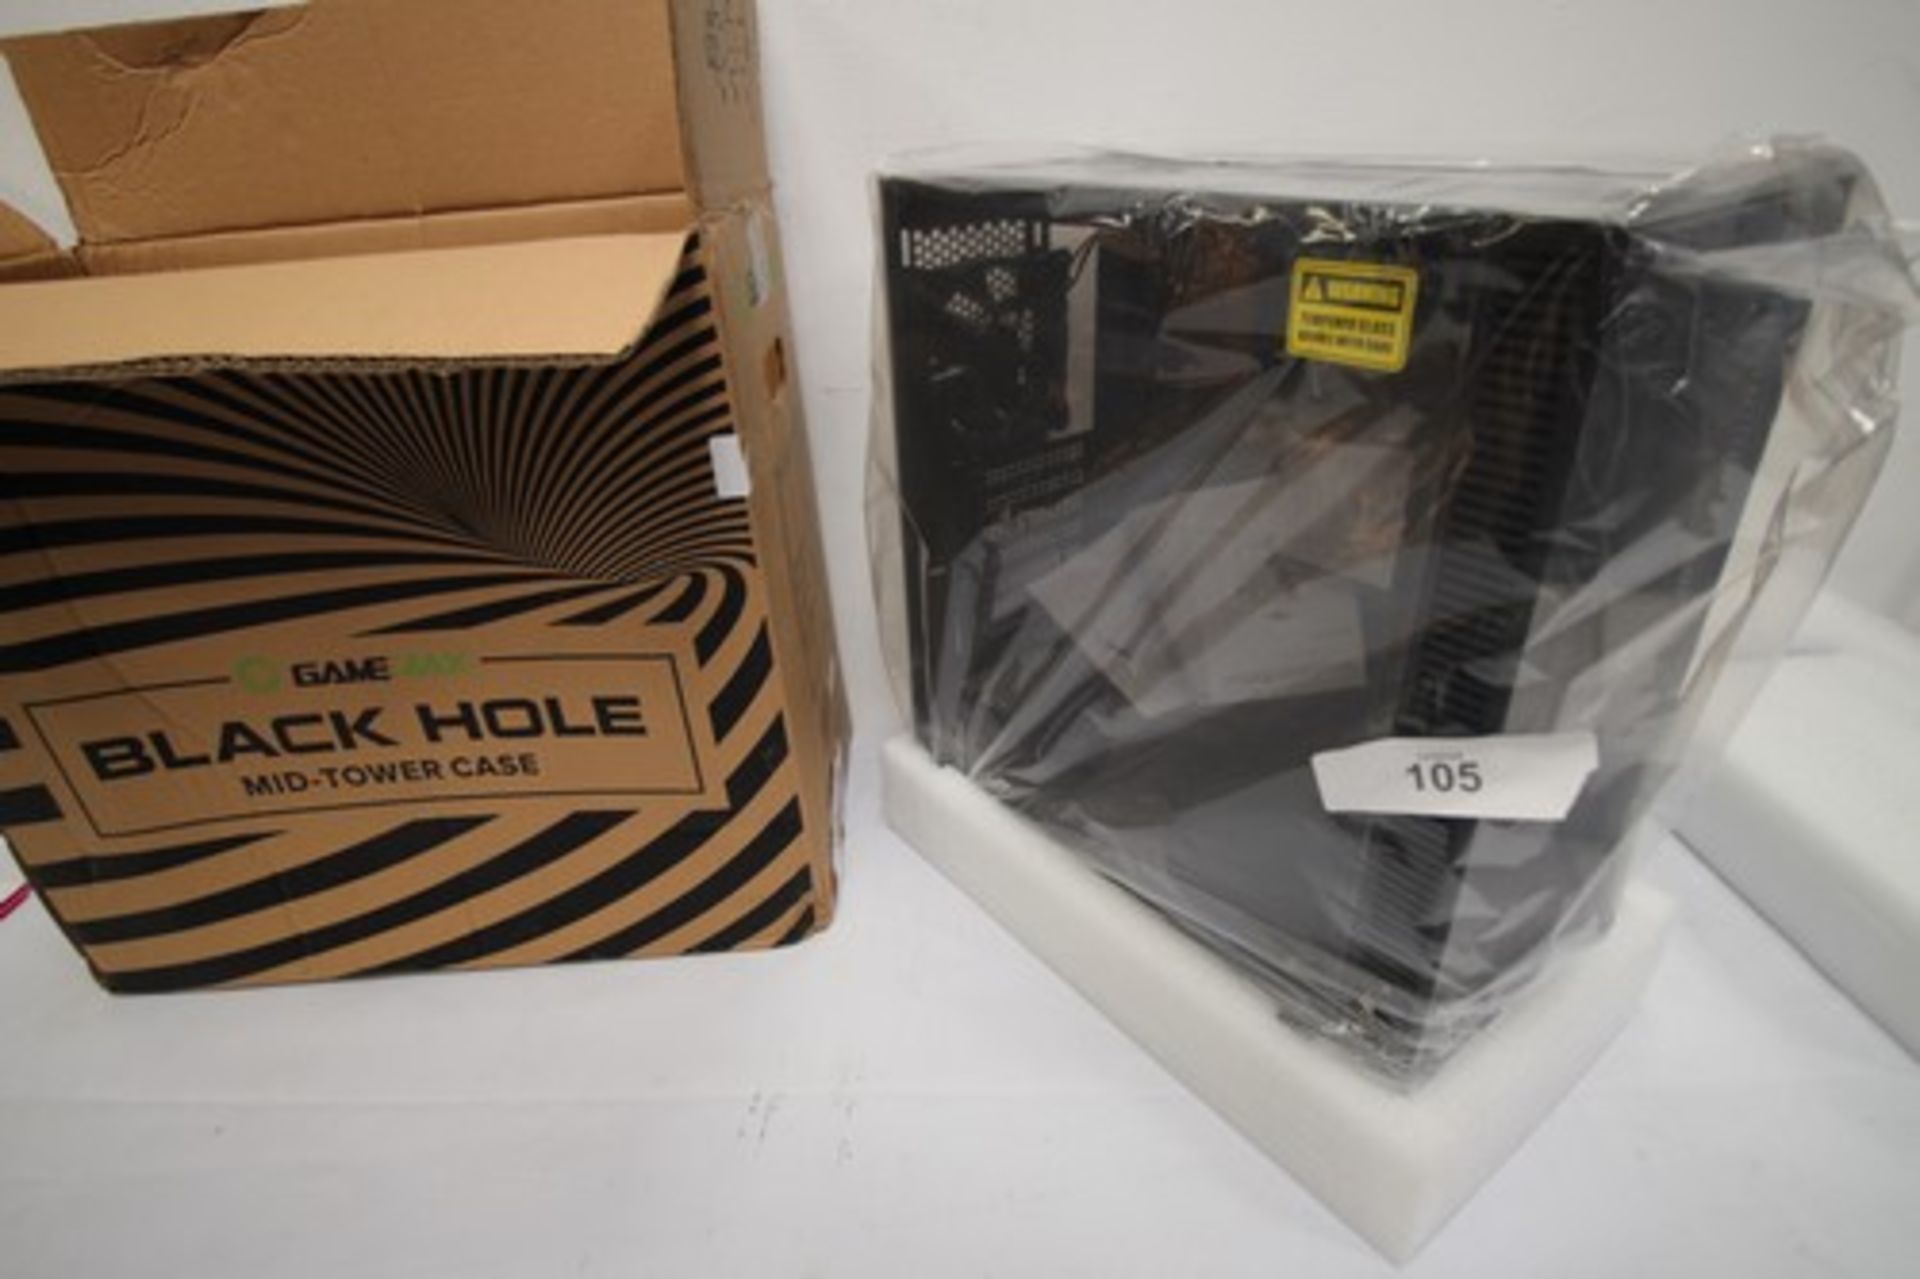 1 x Game Max black hole mid tower PC case, model: 3603-TB - new in box (ES1)